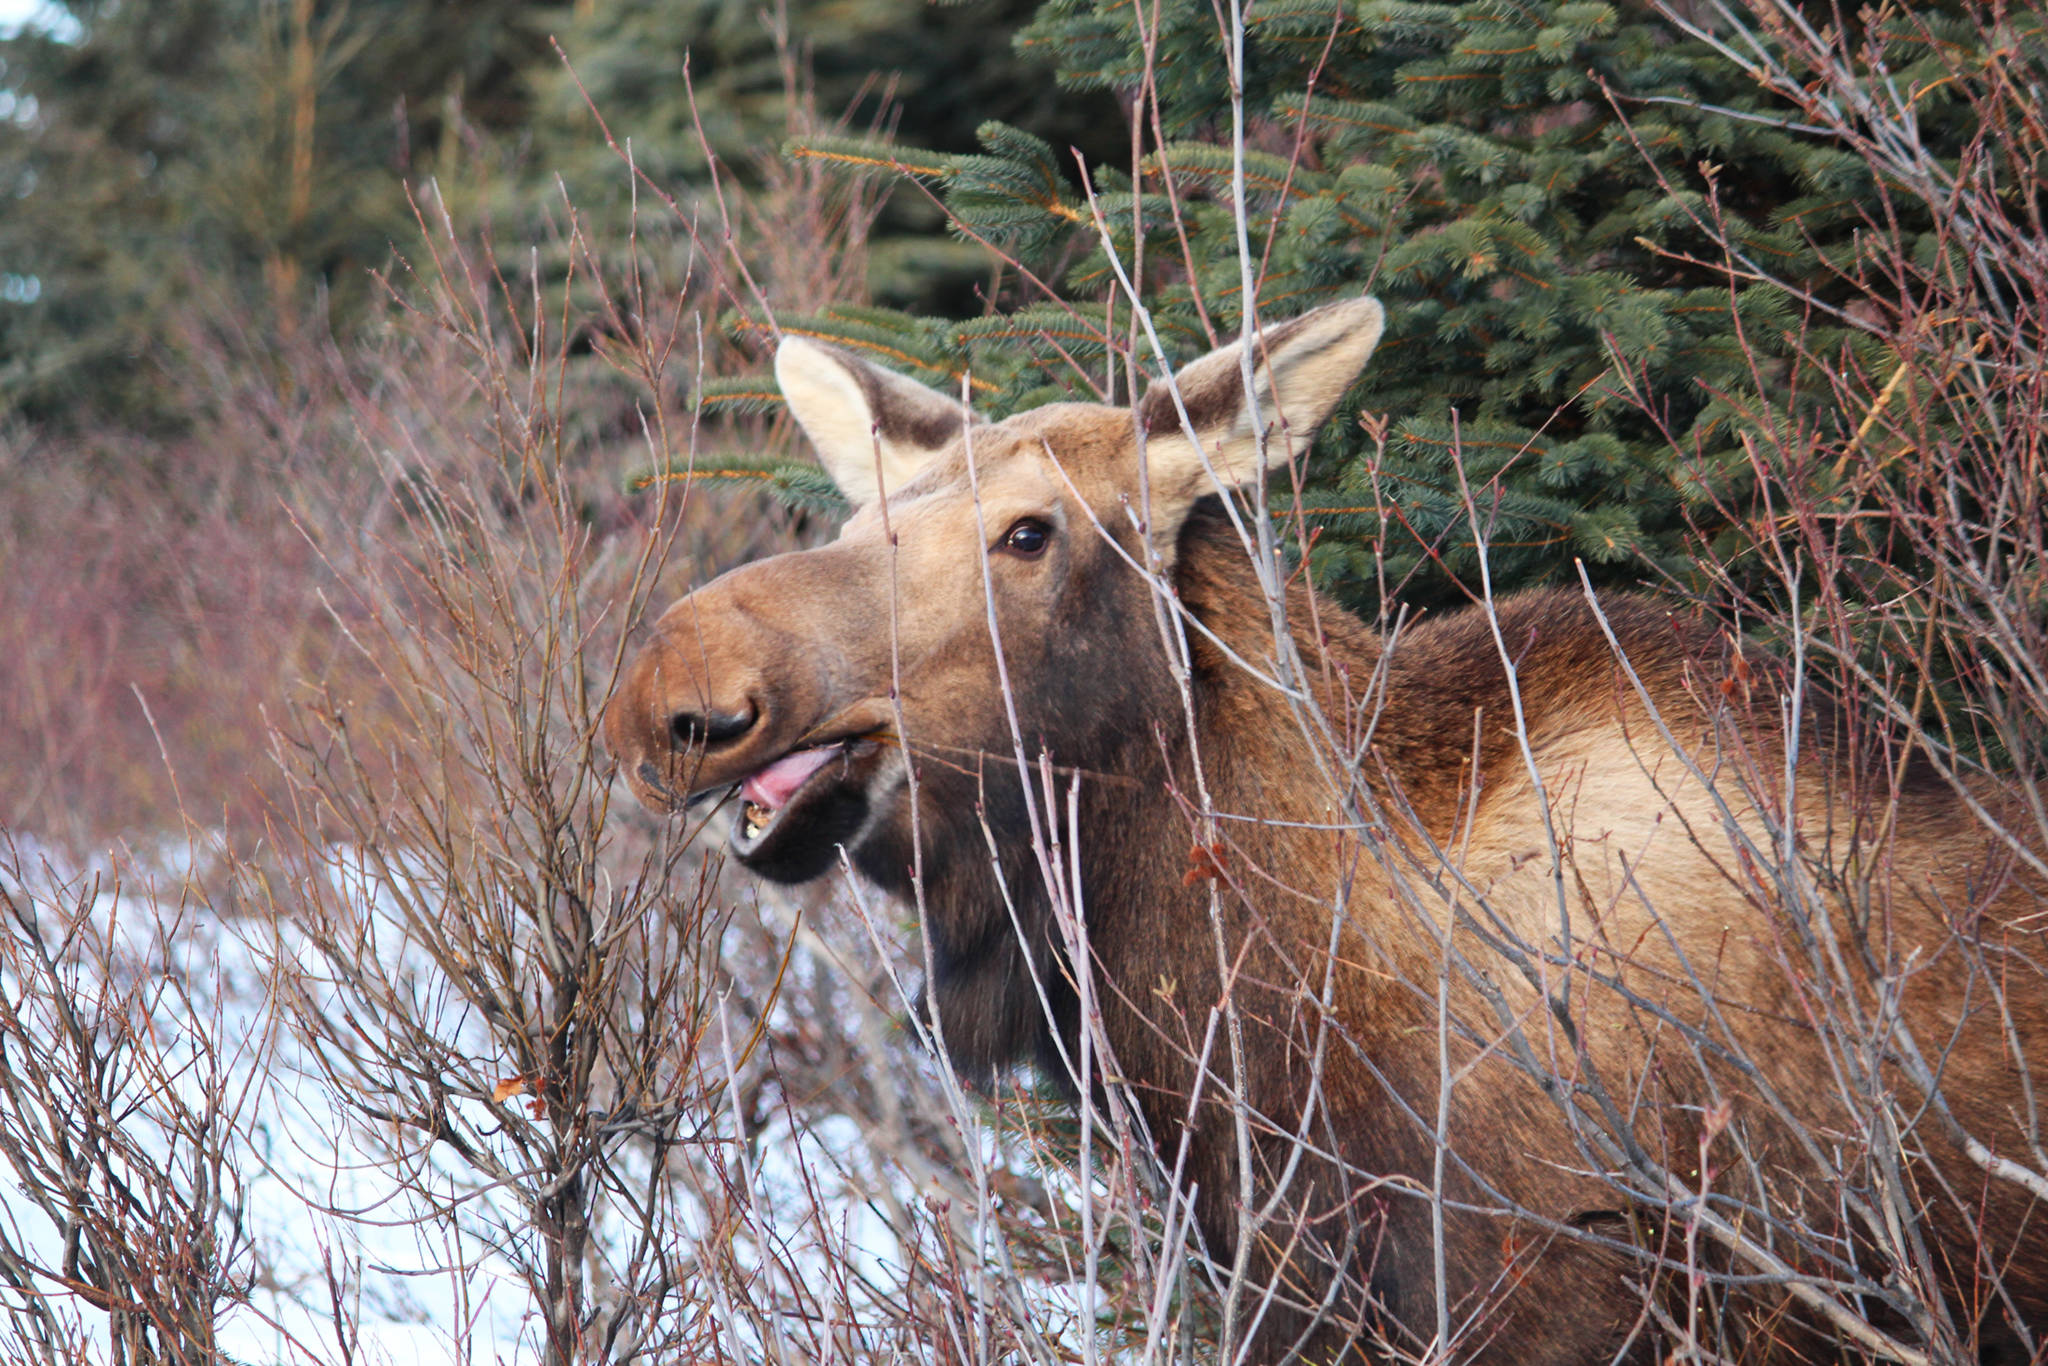 A cow moose munches on some bushes Thursday, March 1, 2018 on Ohlson Mountain Road outside Homer, Alaska. She, another moose and a calf browsed just along the side of the road, where the snow was slightly less deep. With March bringing with it the whiplash of repeated snow falls and thawing, many moose are gravitating toward roads to give themselves an easier time navigating. (Photo by Megan Pacer/Homer News)